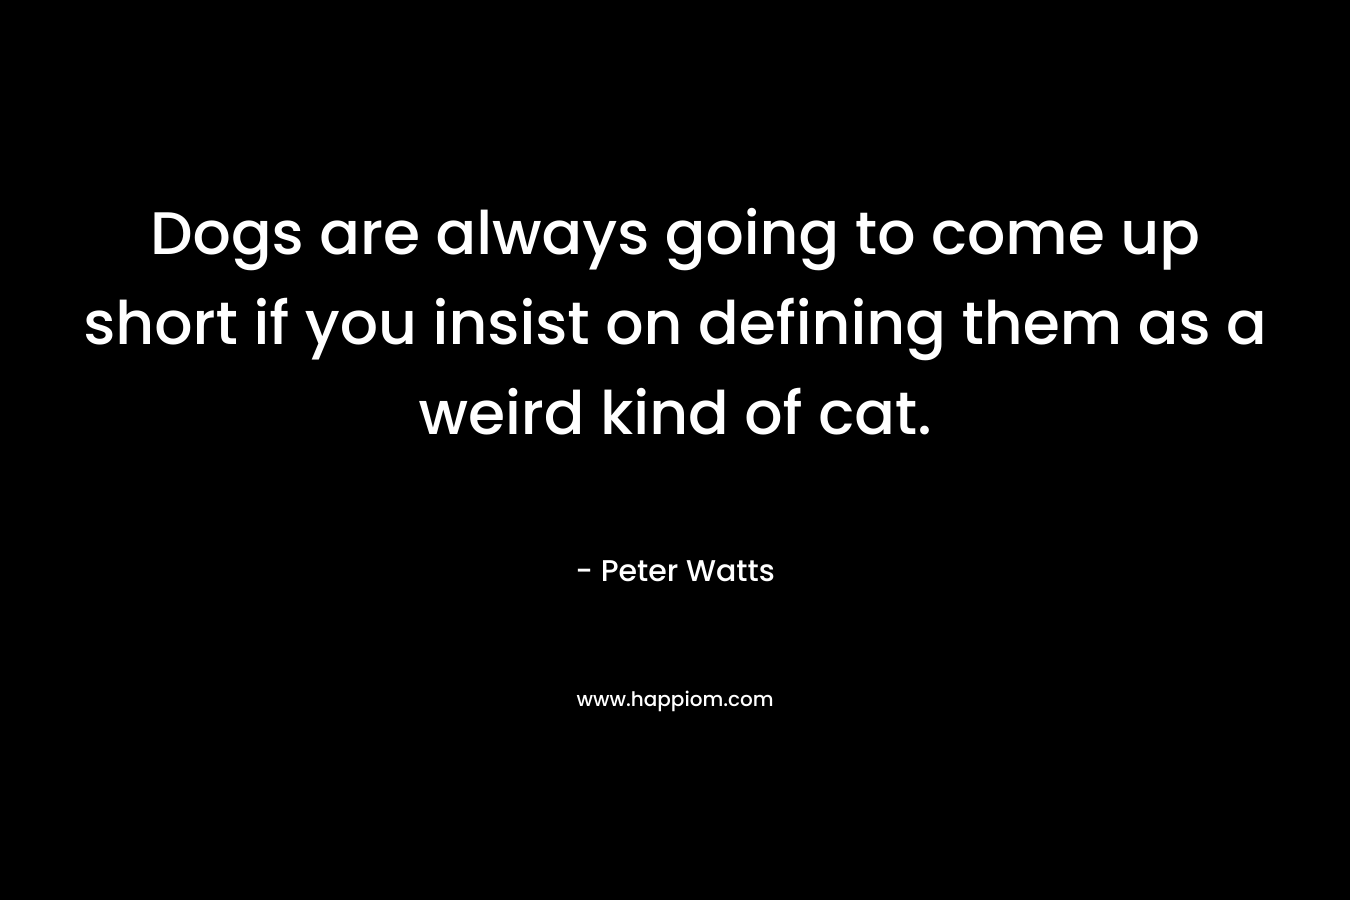 Dogs are always going to come up short if you insist on defining them as a weird kind of cat. – Peter Watts